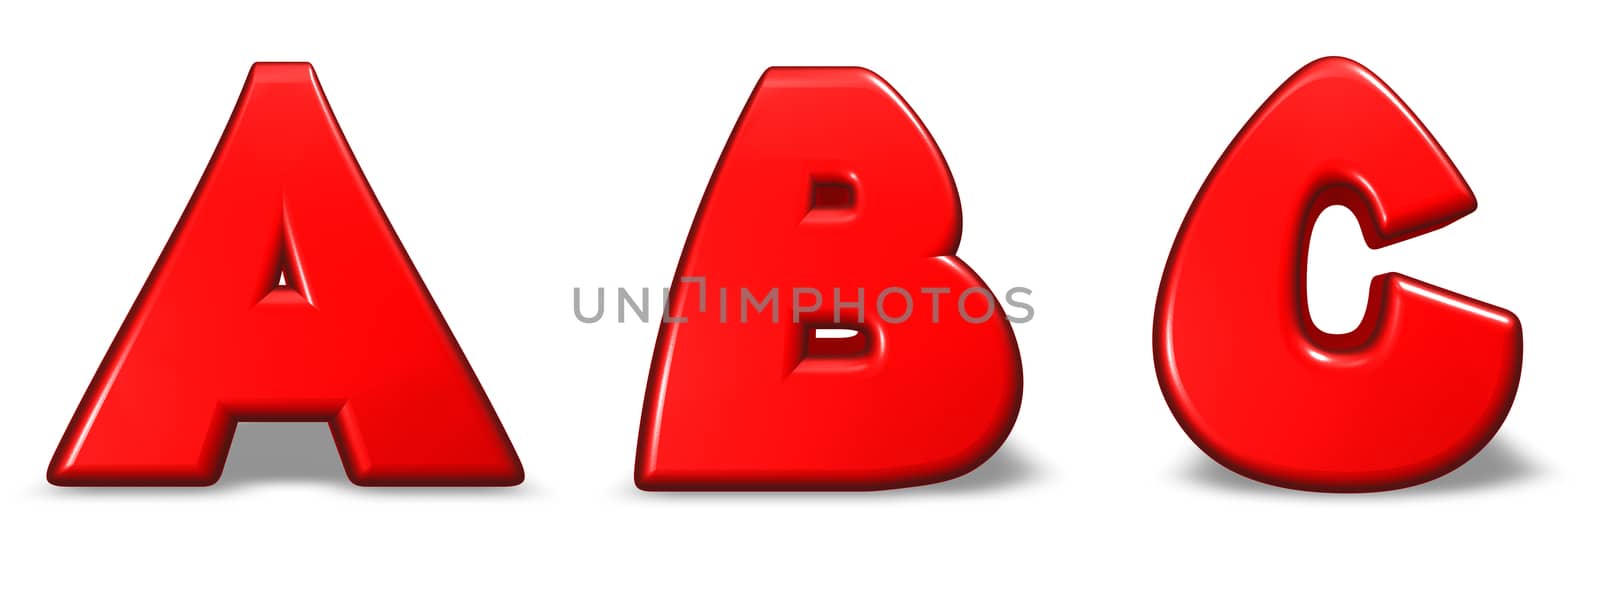 red letters a, b and c on white background - 3d illustration